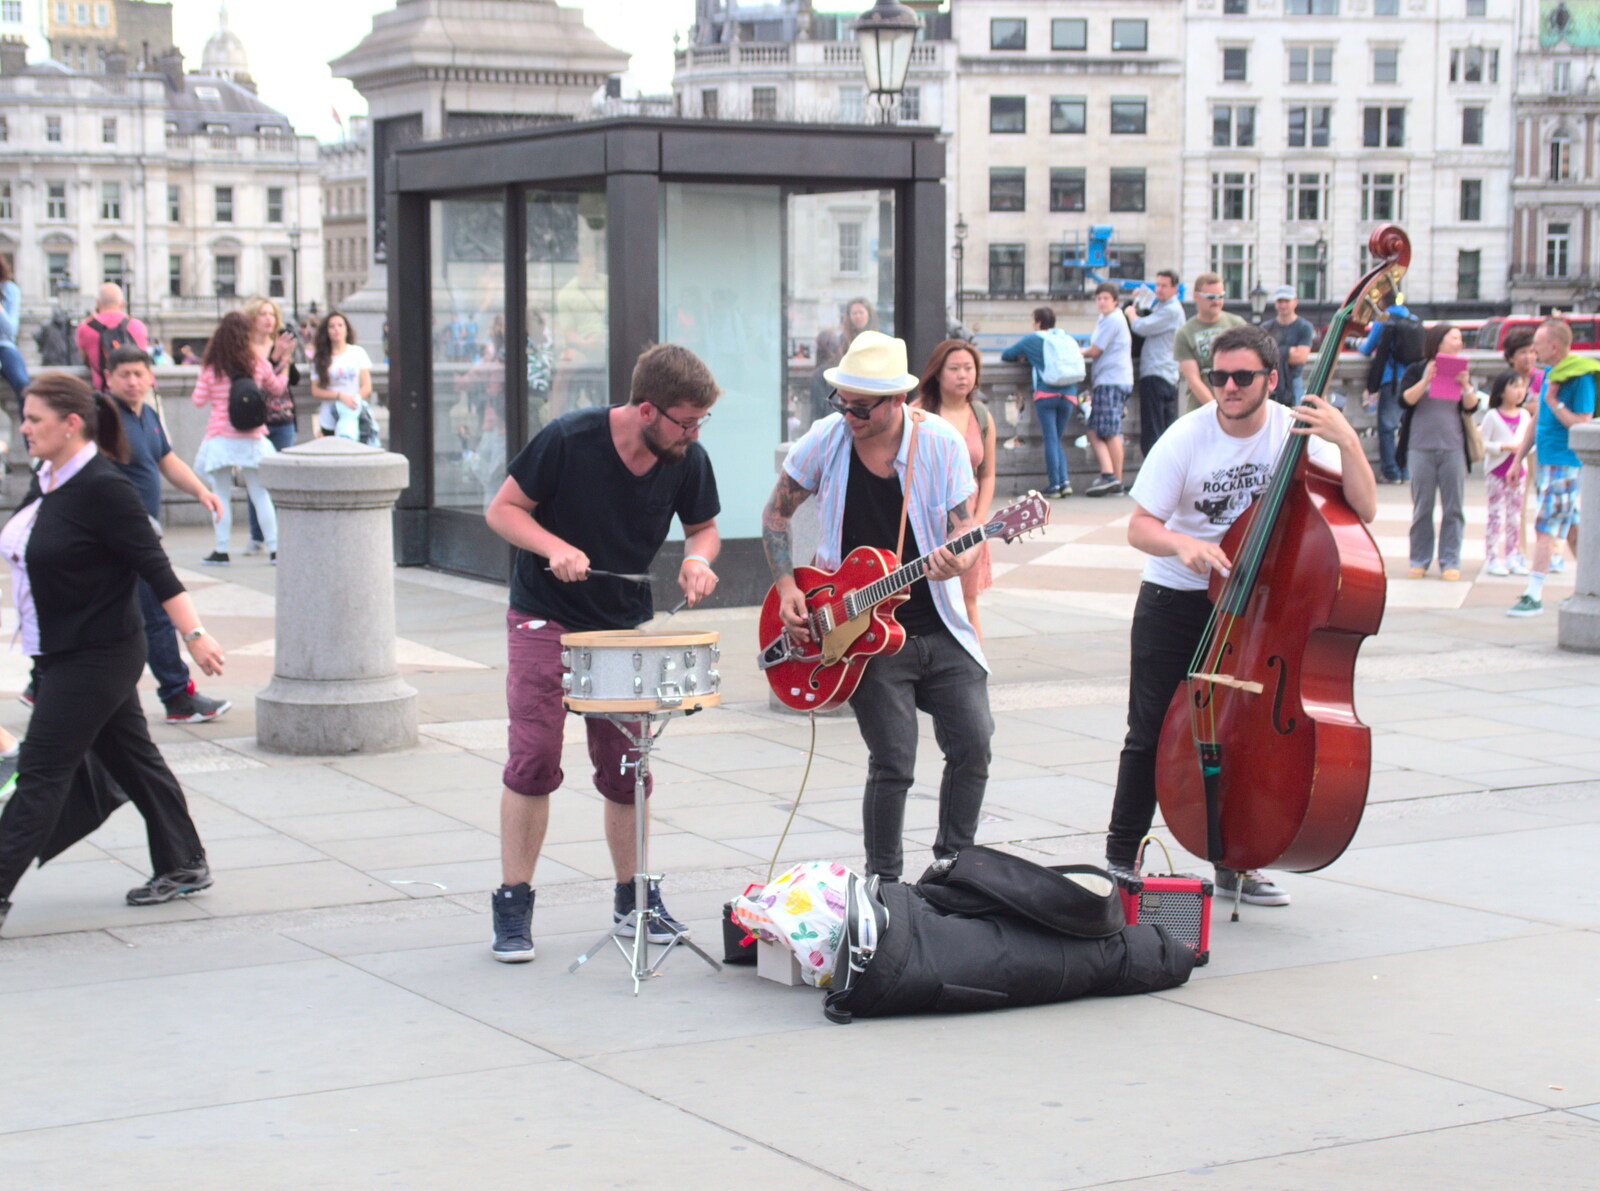 There's a skiffle band on Trafalgar Square from SwiftKey Innovation Days, The Haymarket, London - 27th June 2014